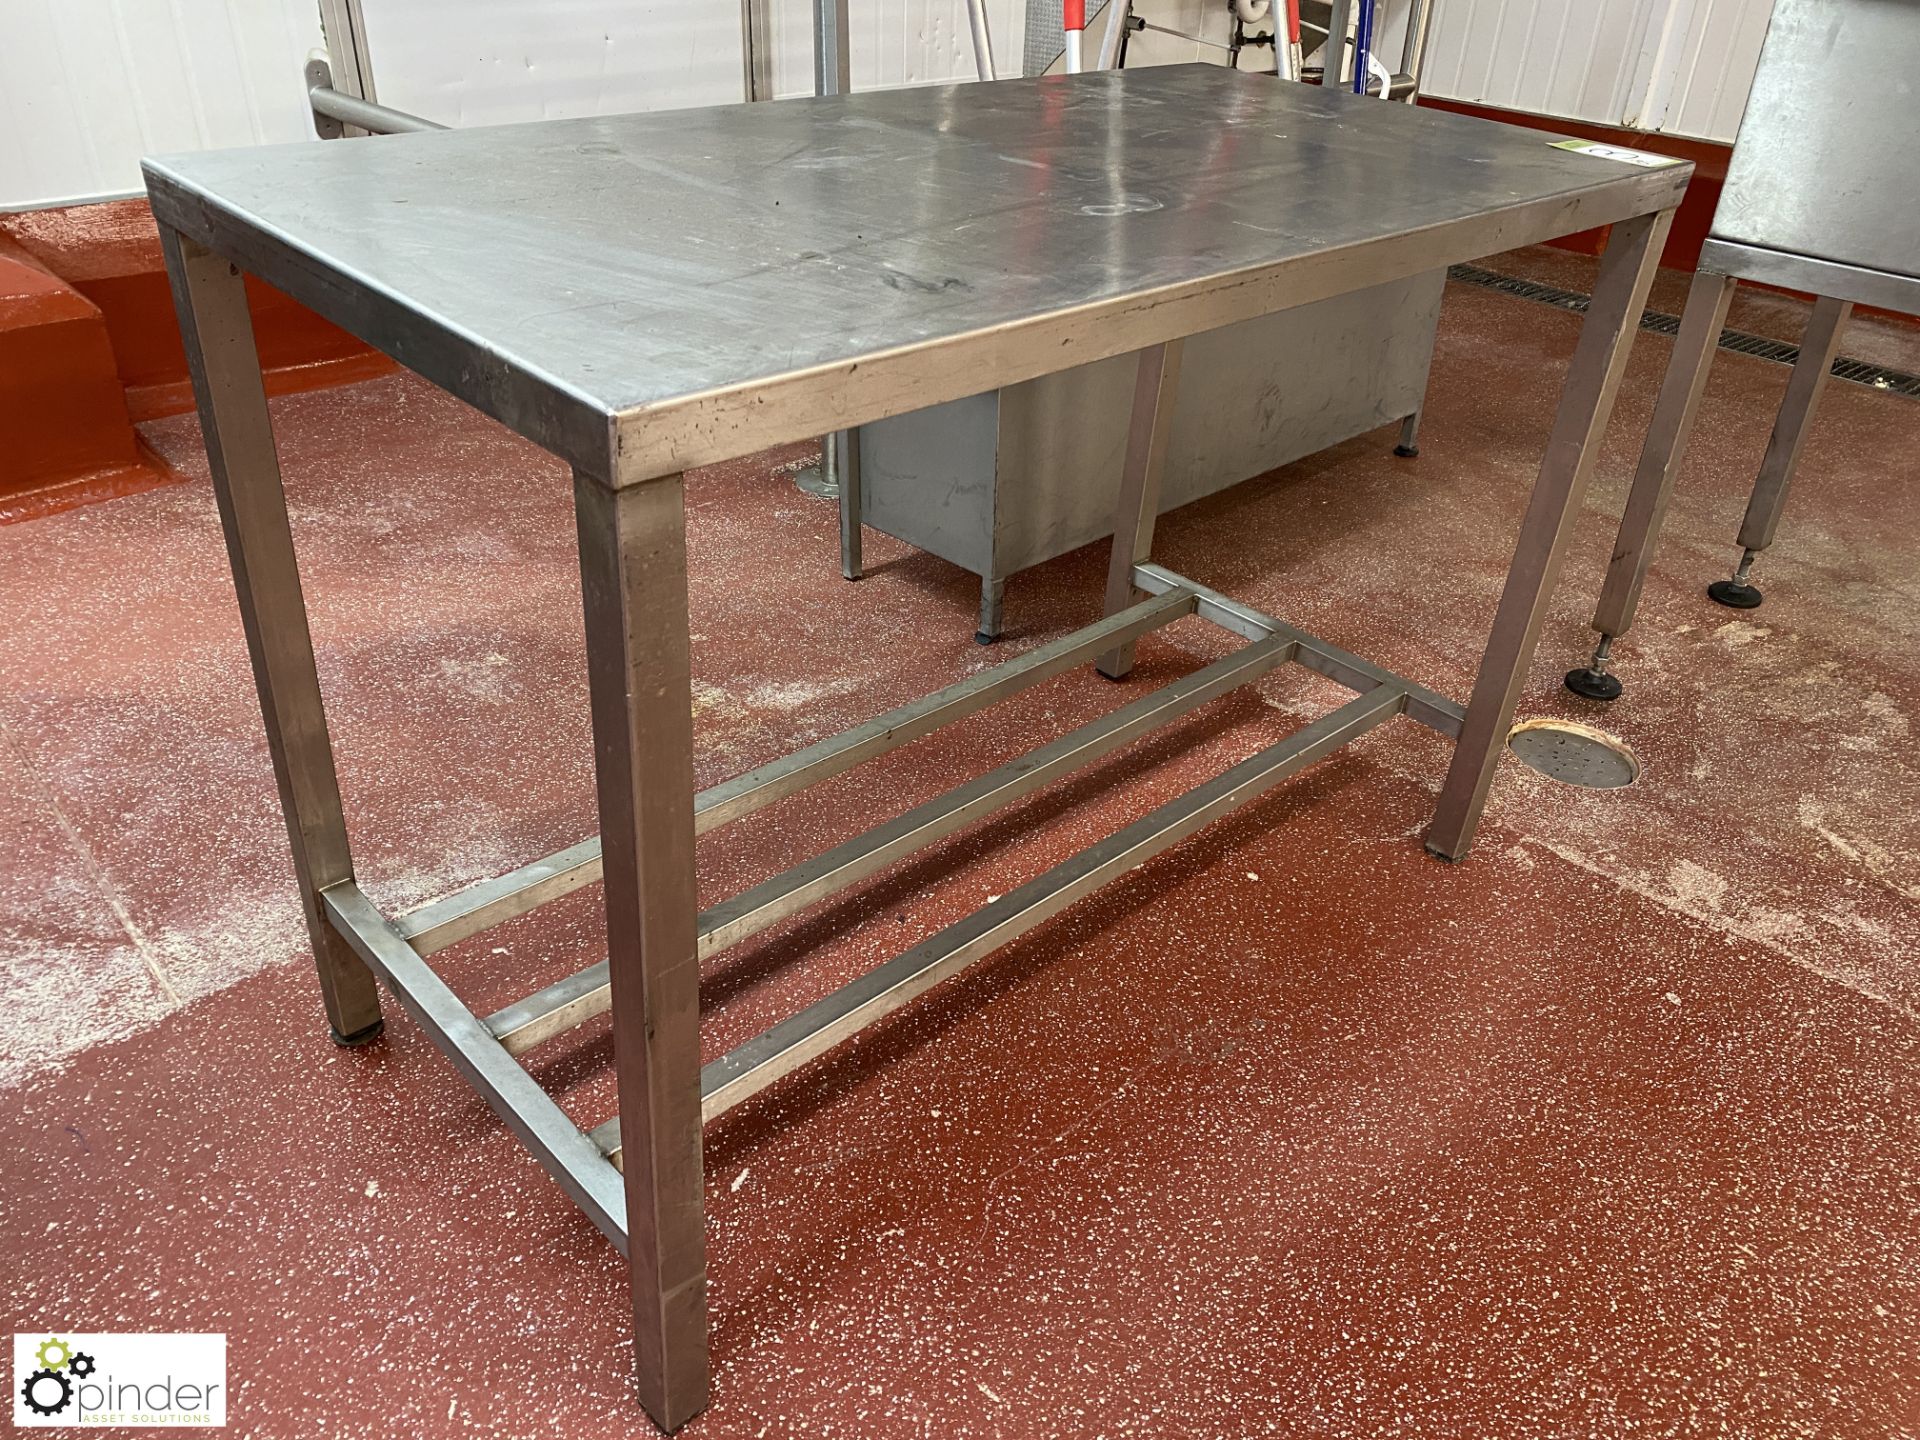 Stainless steel Preparation Table, 1200mm x 600mm x 820mm (Lift Out Fee: £10 plus VAT) - Image 2 of 3